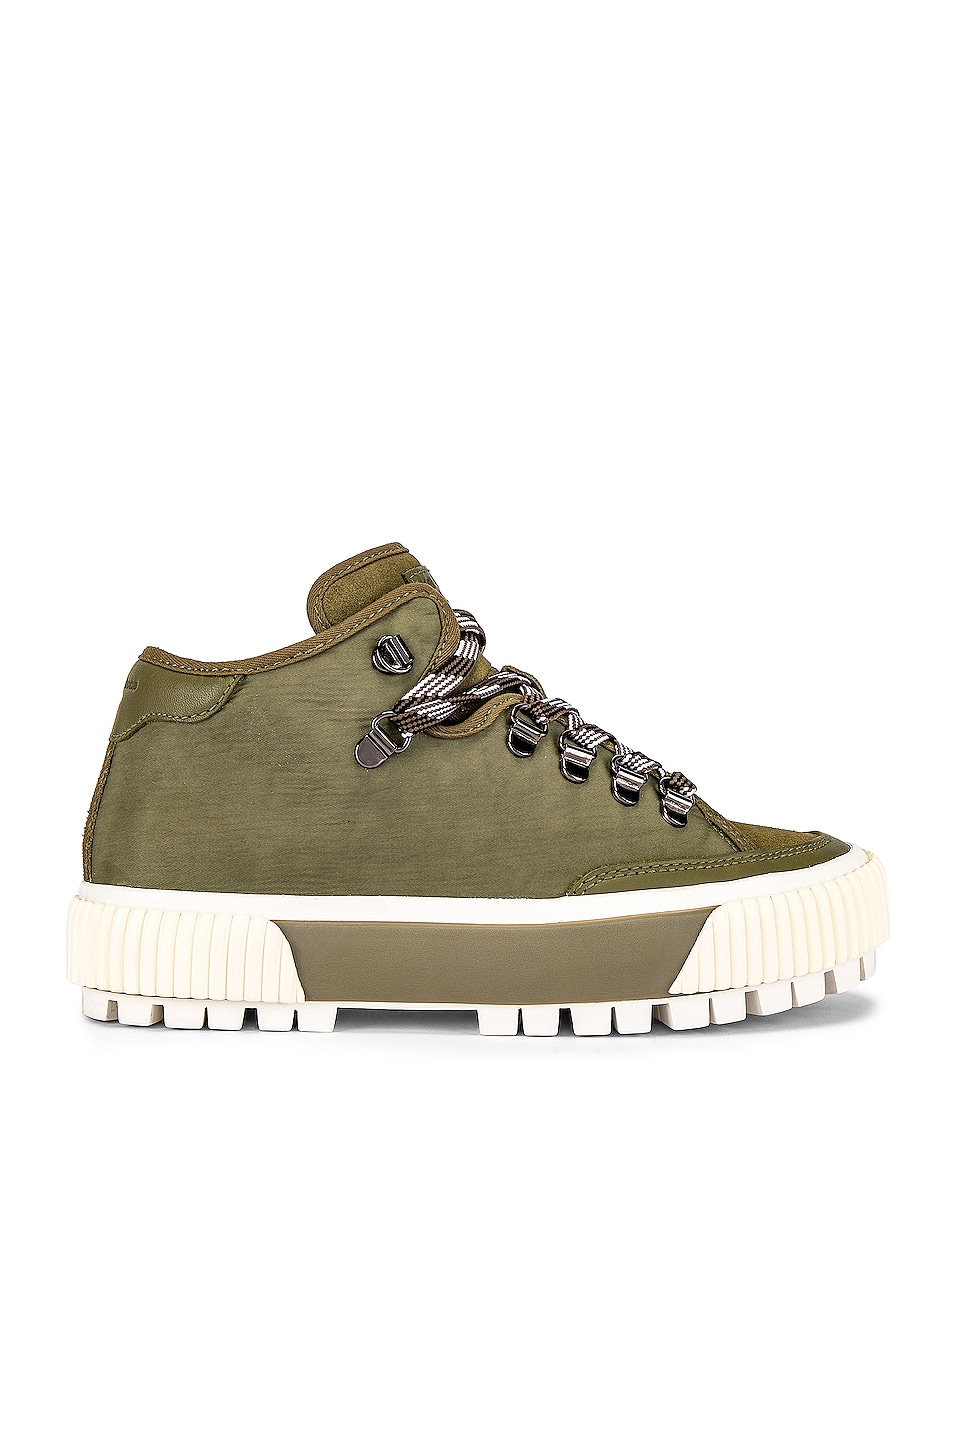 rb army sneaker